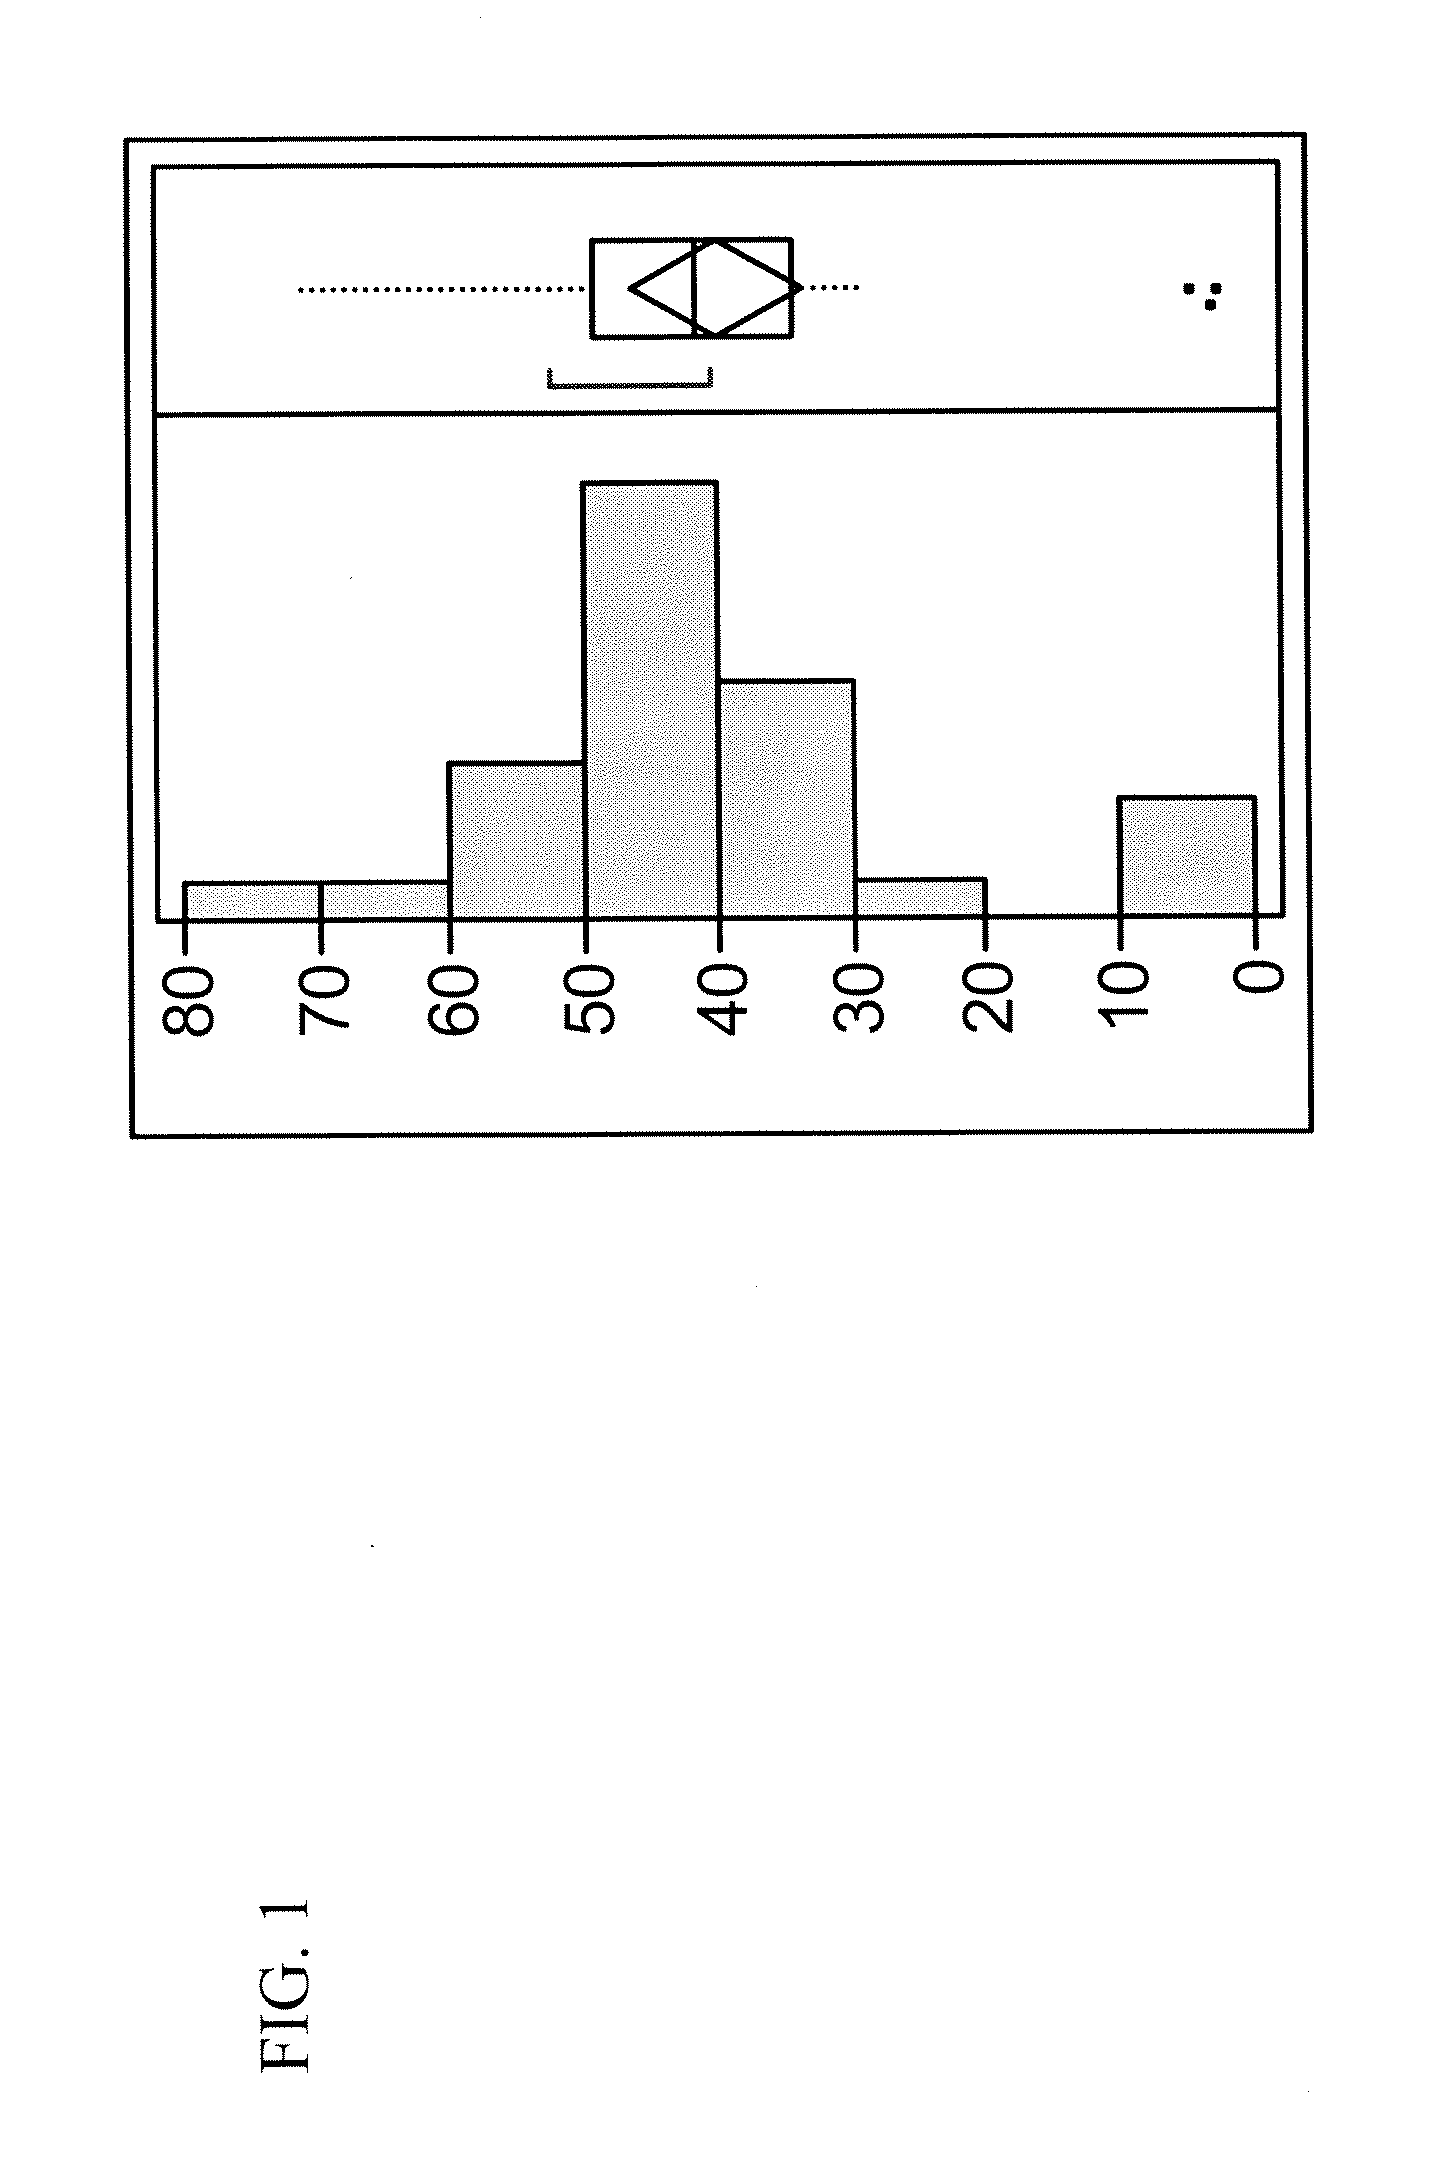 High throughput screening method and use thereof to identify a production platform for a multifunctional binding protein